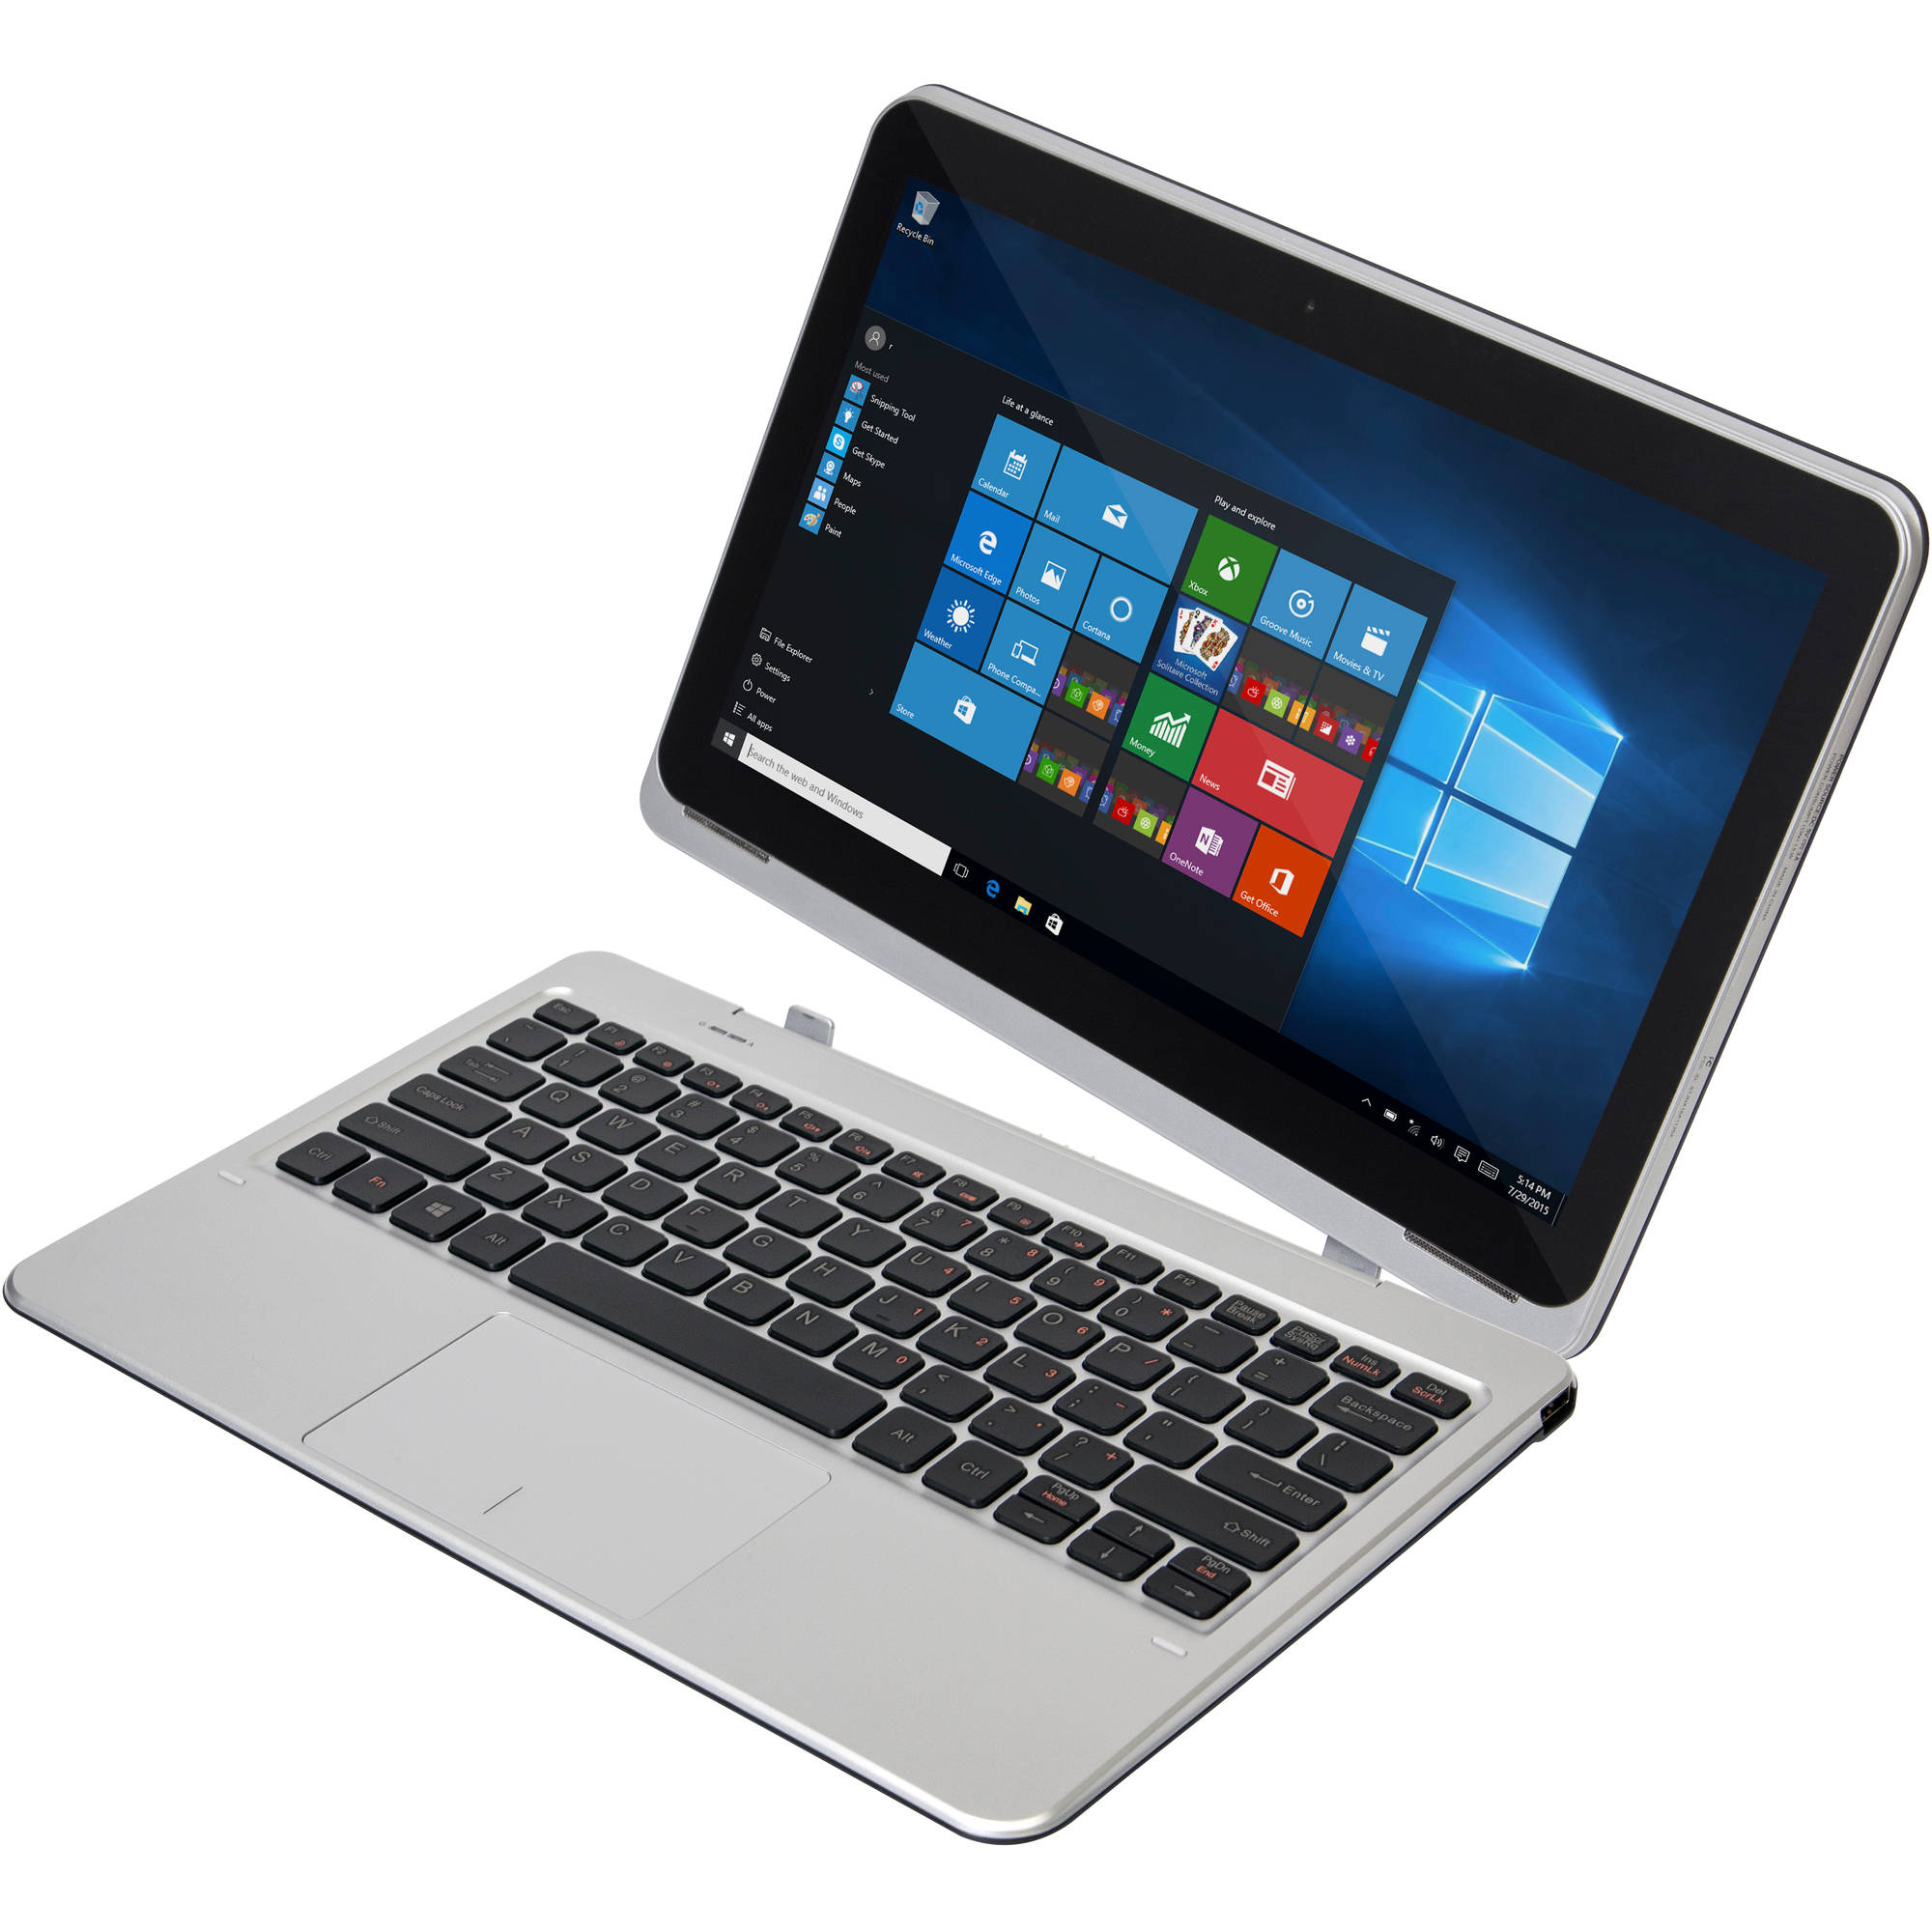 Nextbook Flexx 11A with WiFi 11.6" Convertible Touchscreen Tablet PC Featuring Windows 10 Operating System, Silver - image 1 of 2